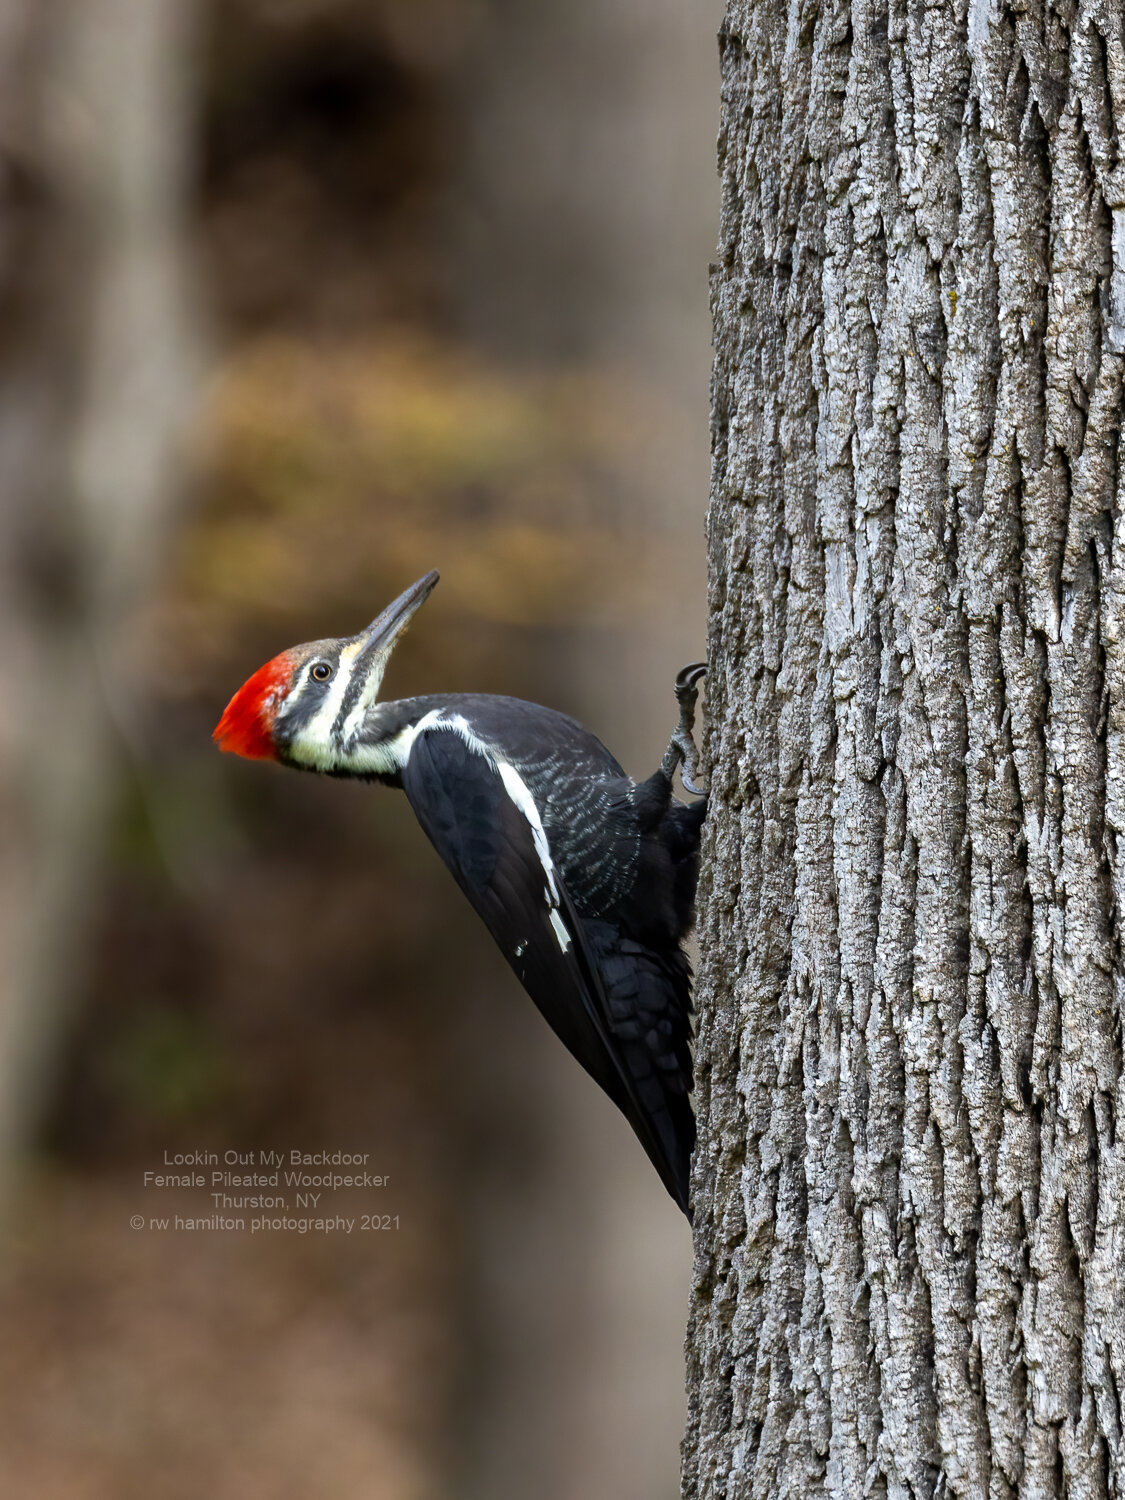 Female Pileated Woodpecker on the Ash Tree